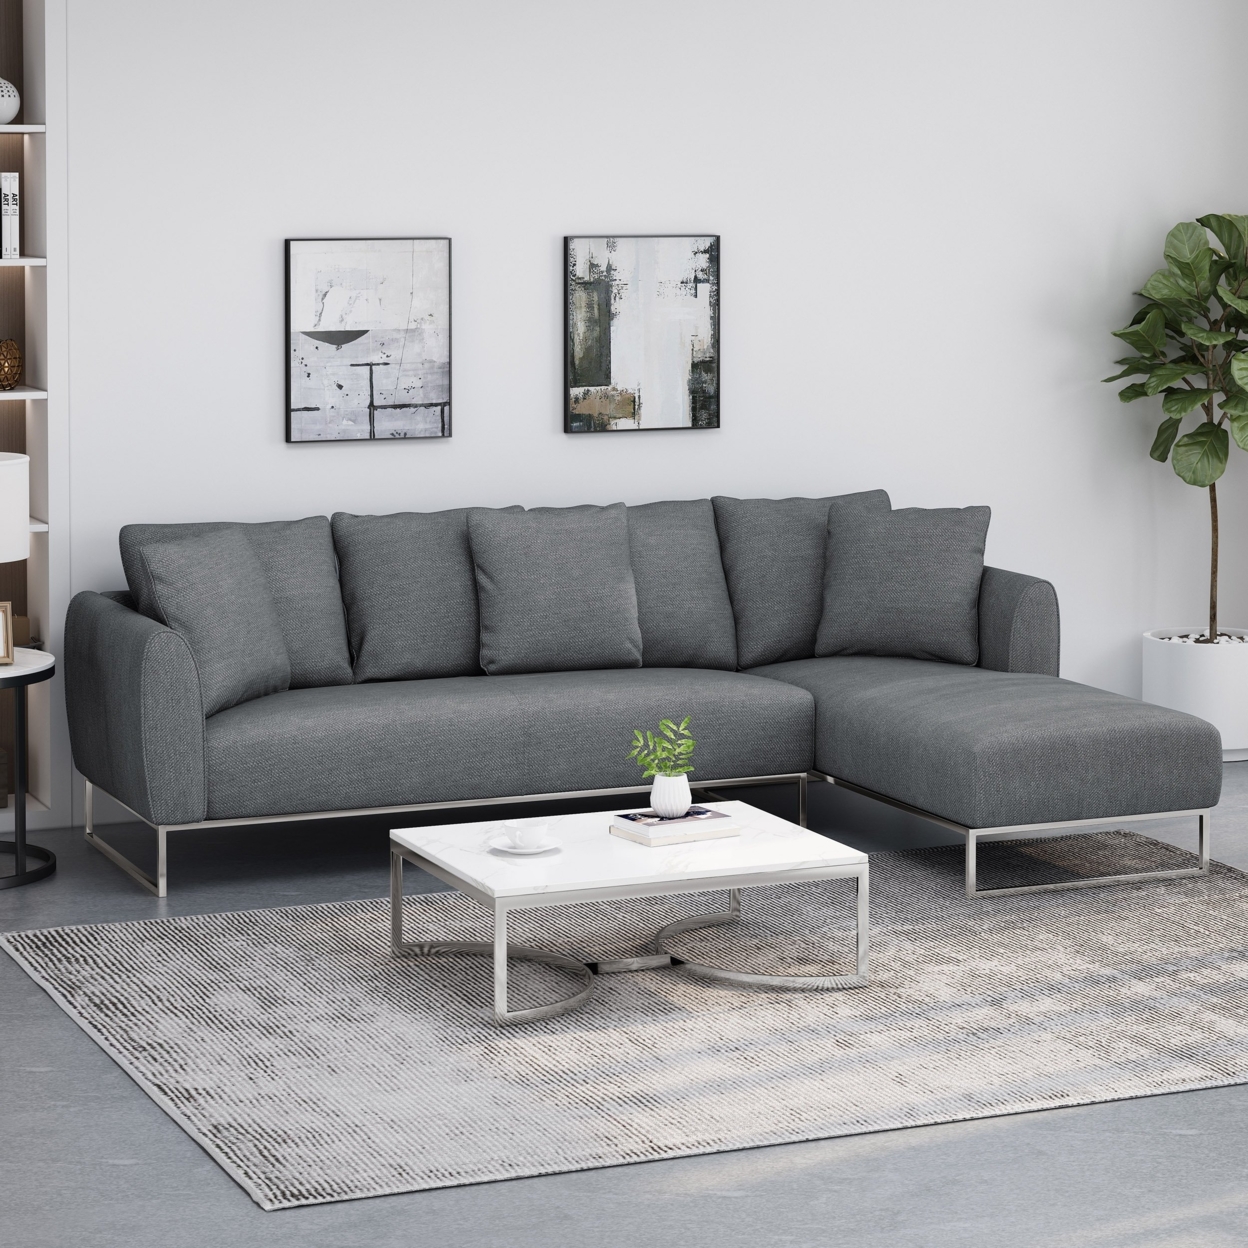 Clarke Contemporary Sectional Sofa With Chaise Lounge - Charcoal